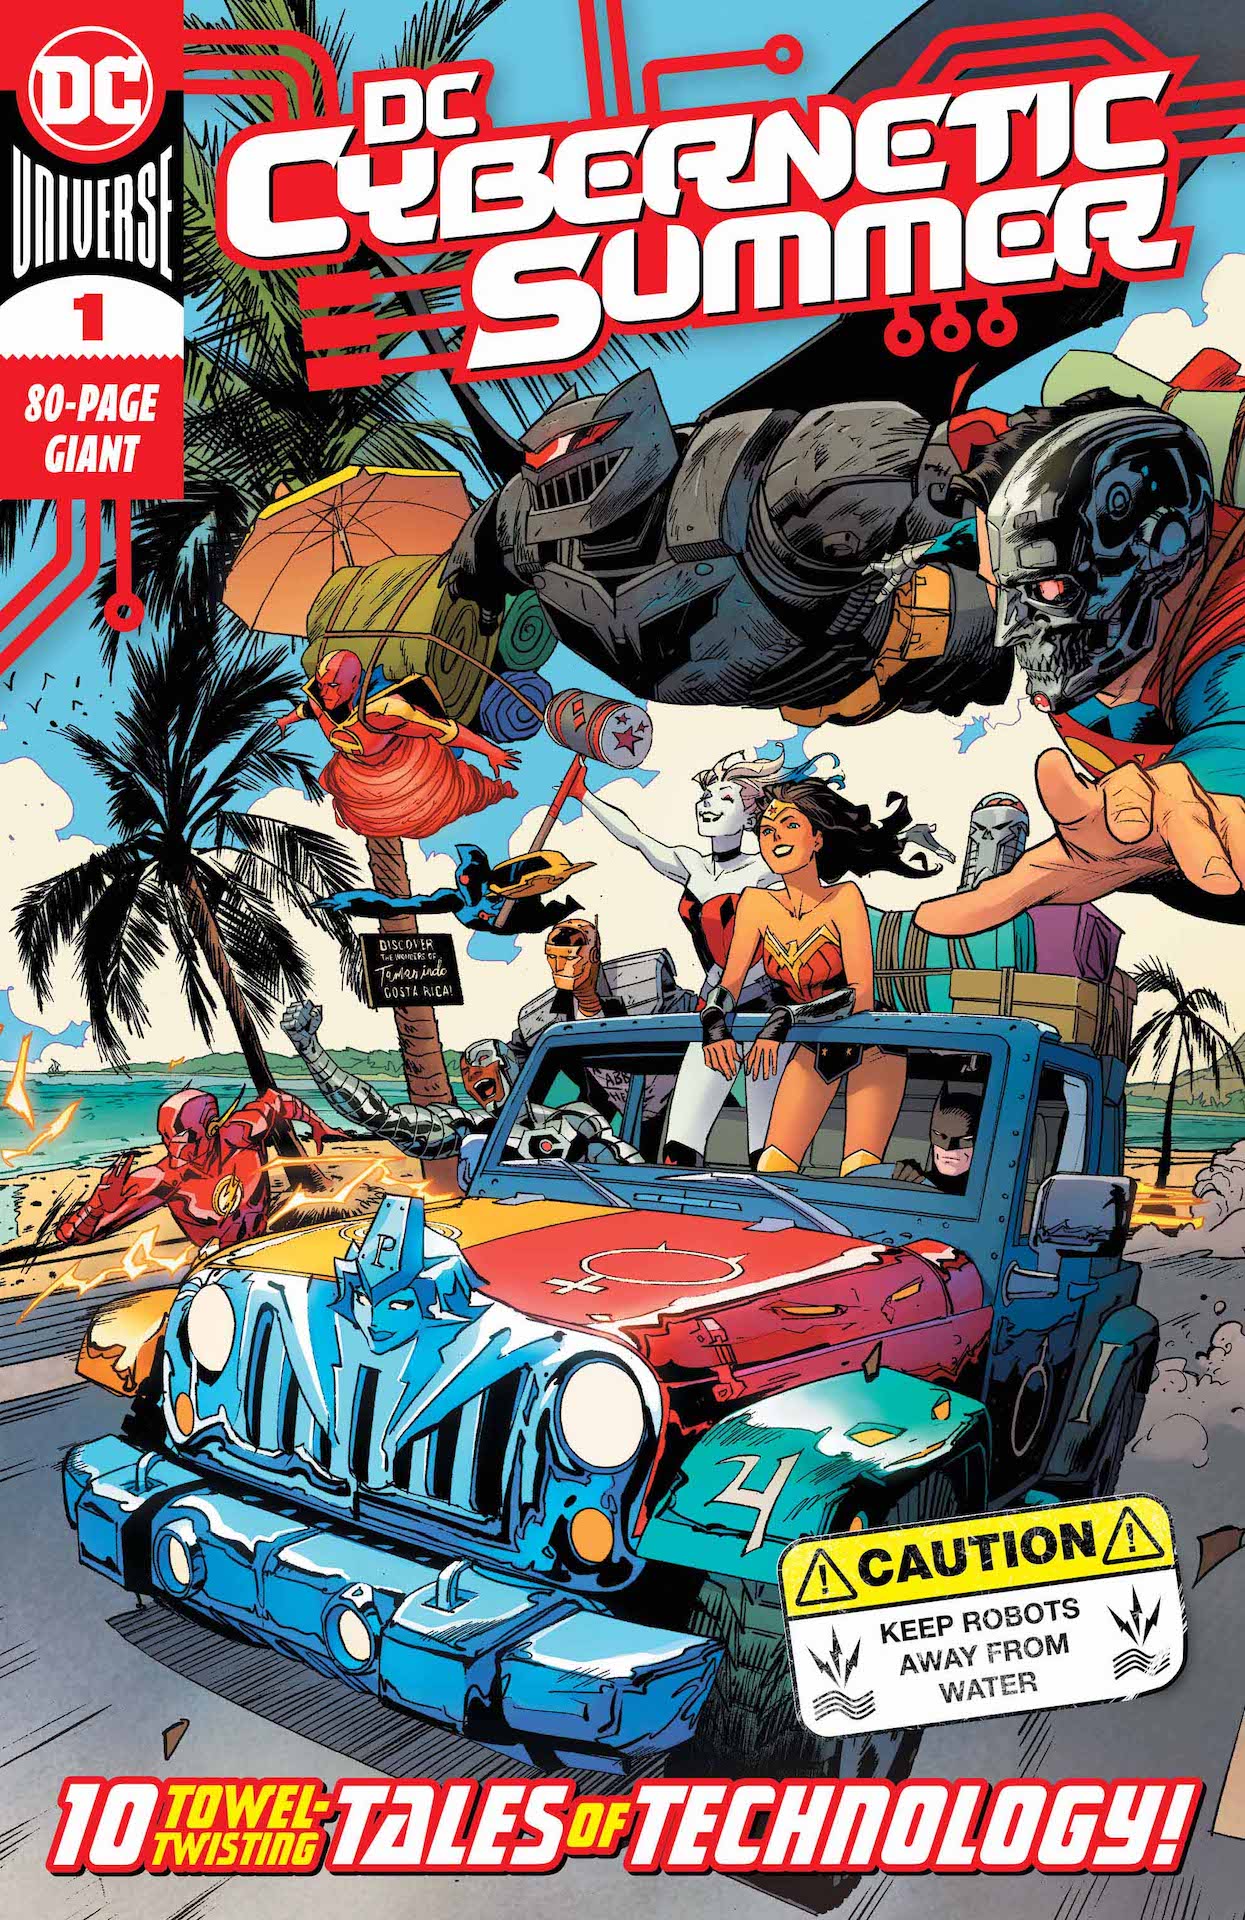 DC Preview: Cybernetic Summer #1